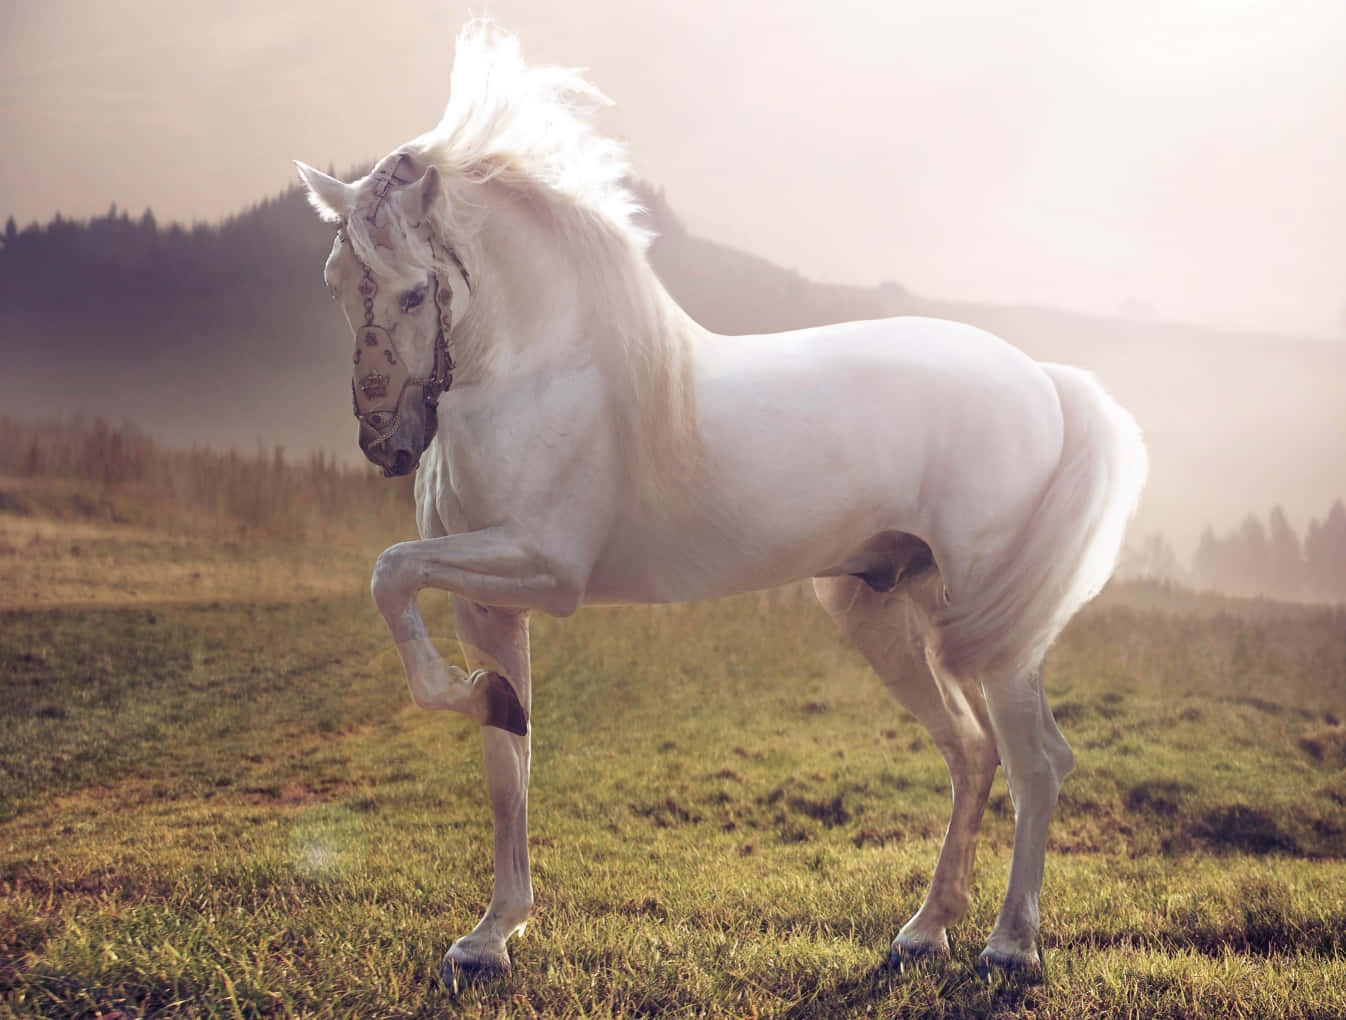 A proud white and brown horse galloping through a grassland